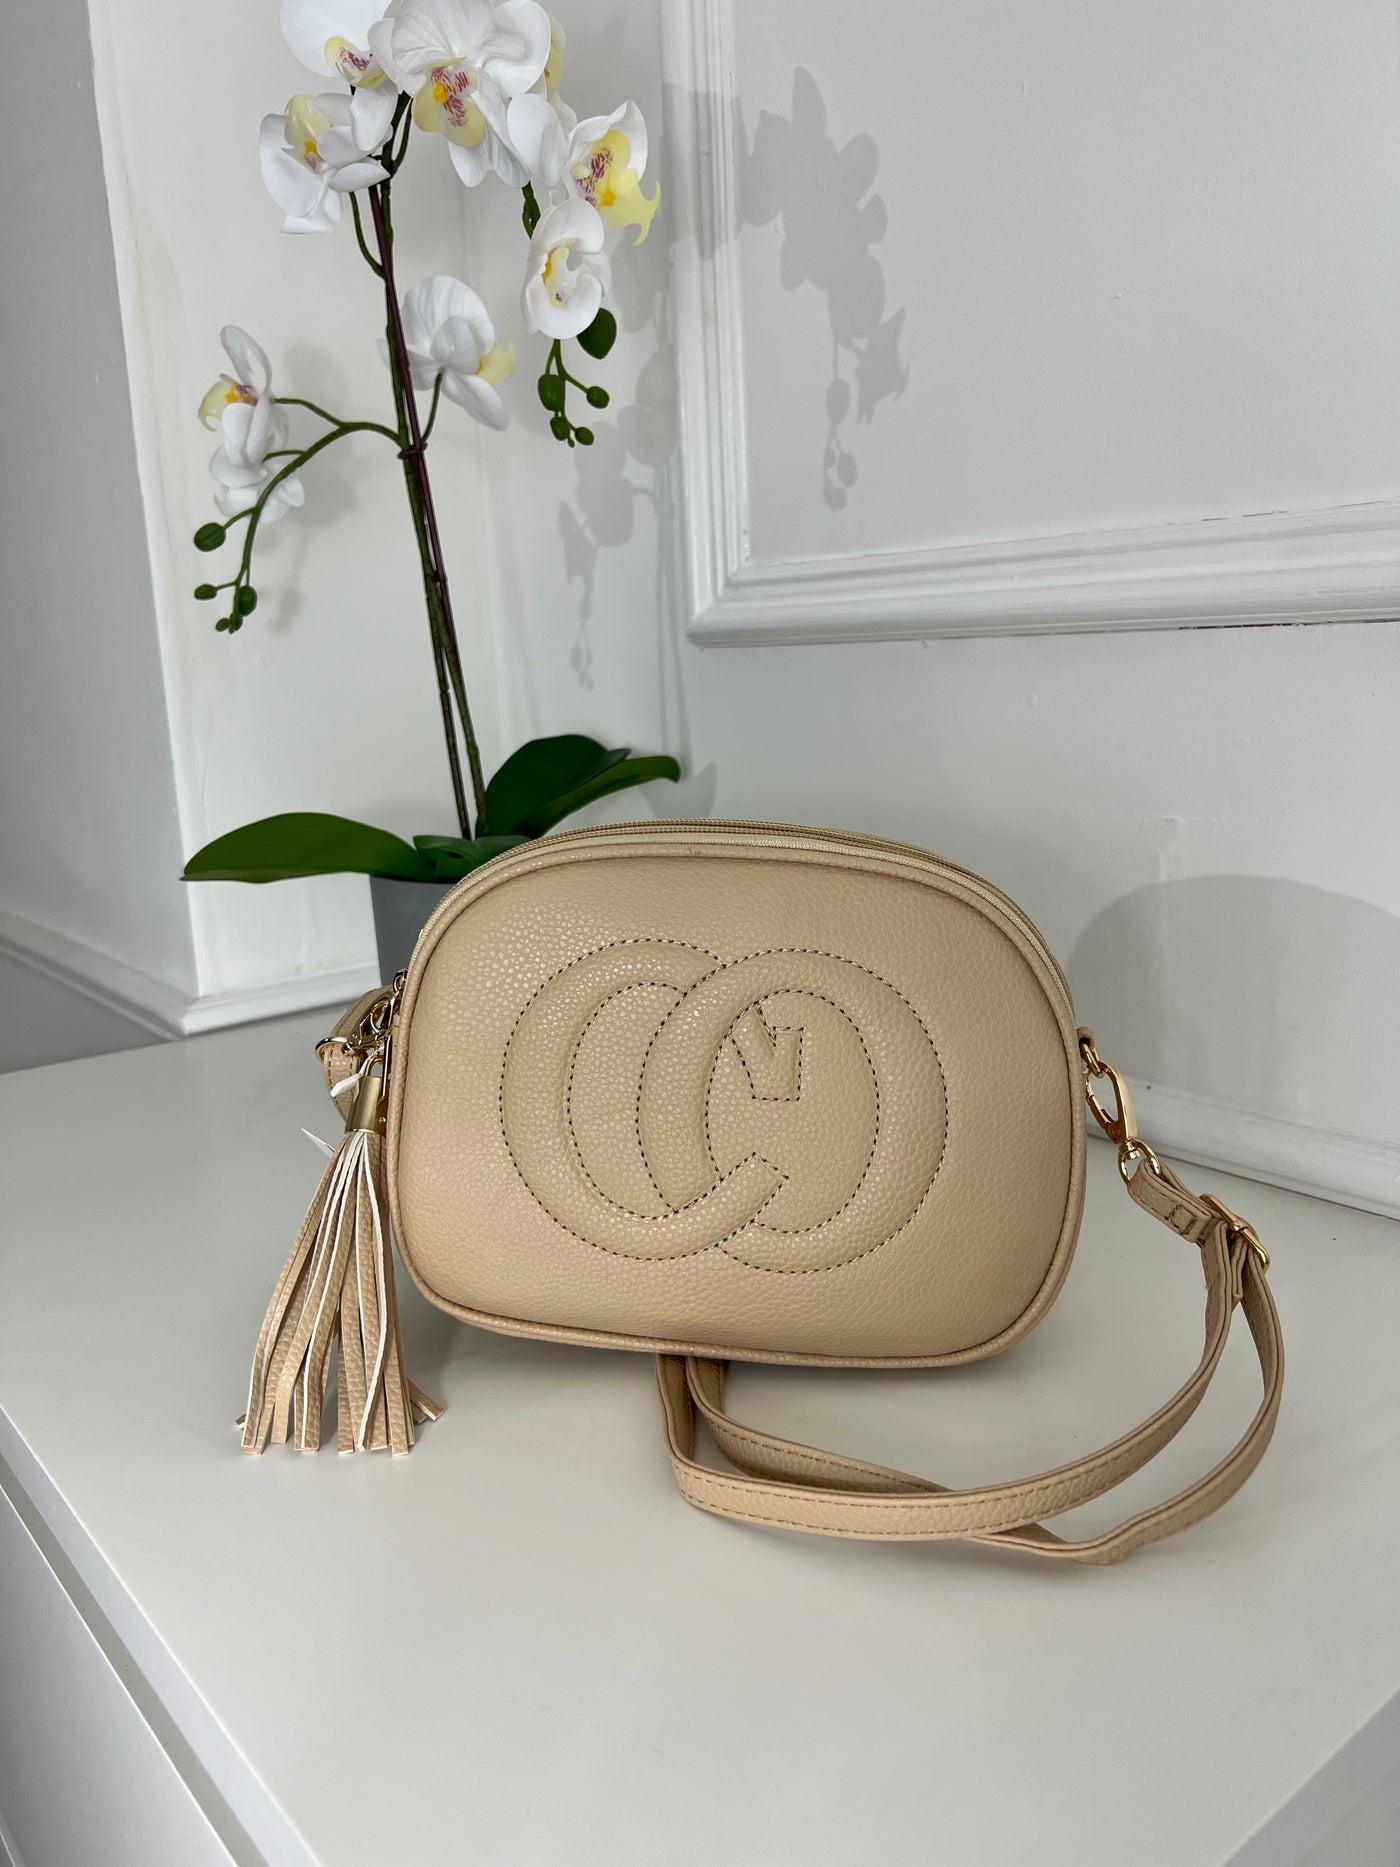 Nude CO embraided cross bag with tassel